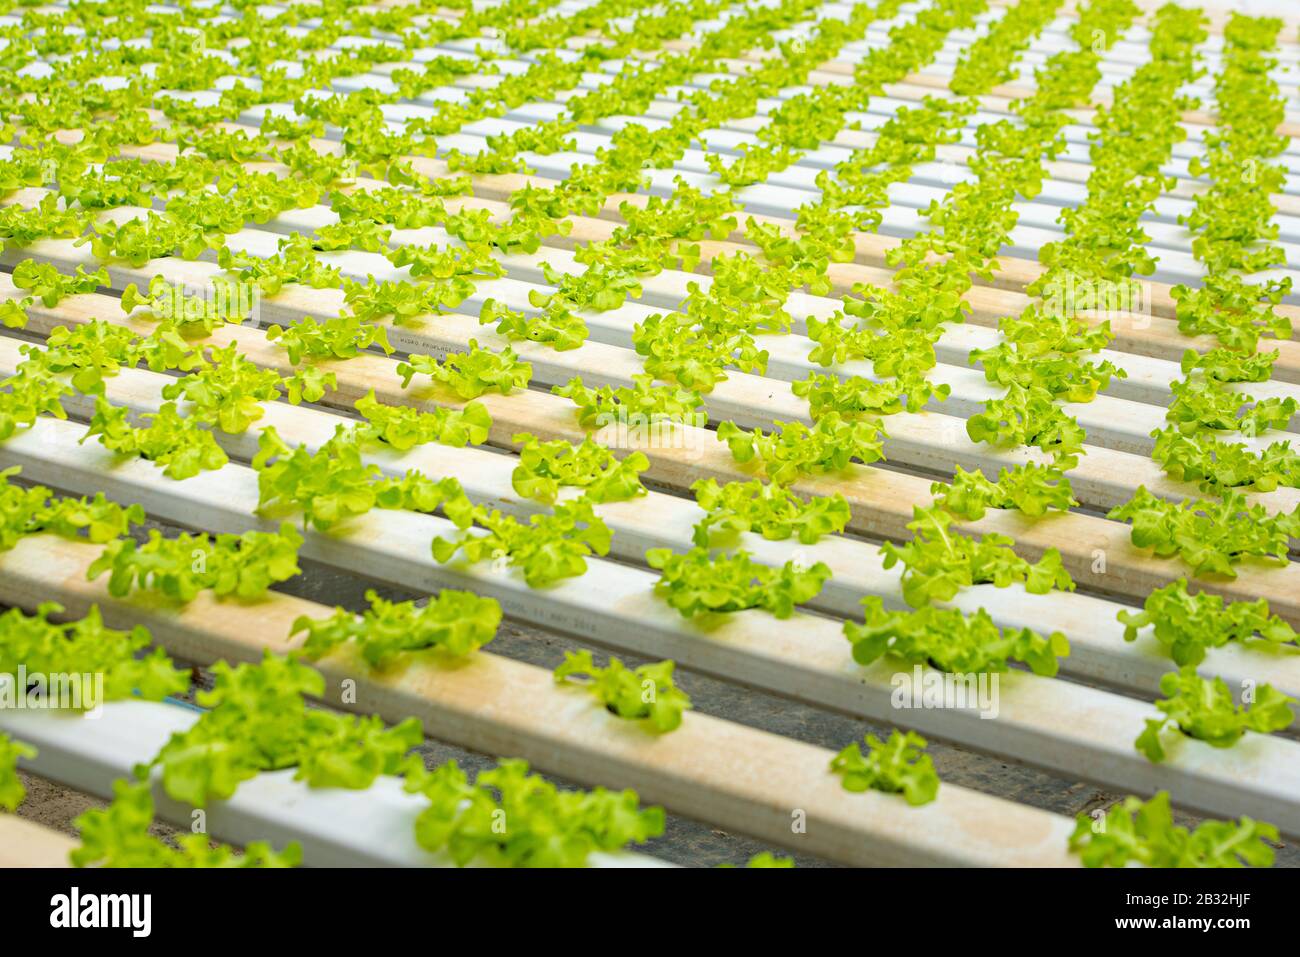 Organic hydroponic vegetable cultivation greenhouse farm.Concept of healthy eating. Farming. Food production. Stock Photo